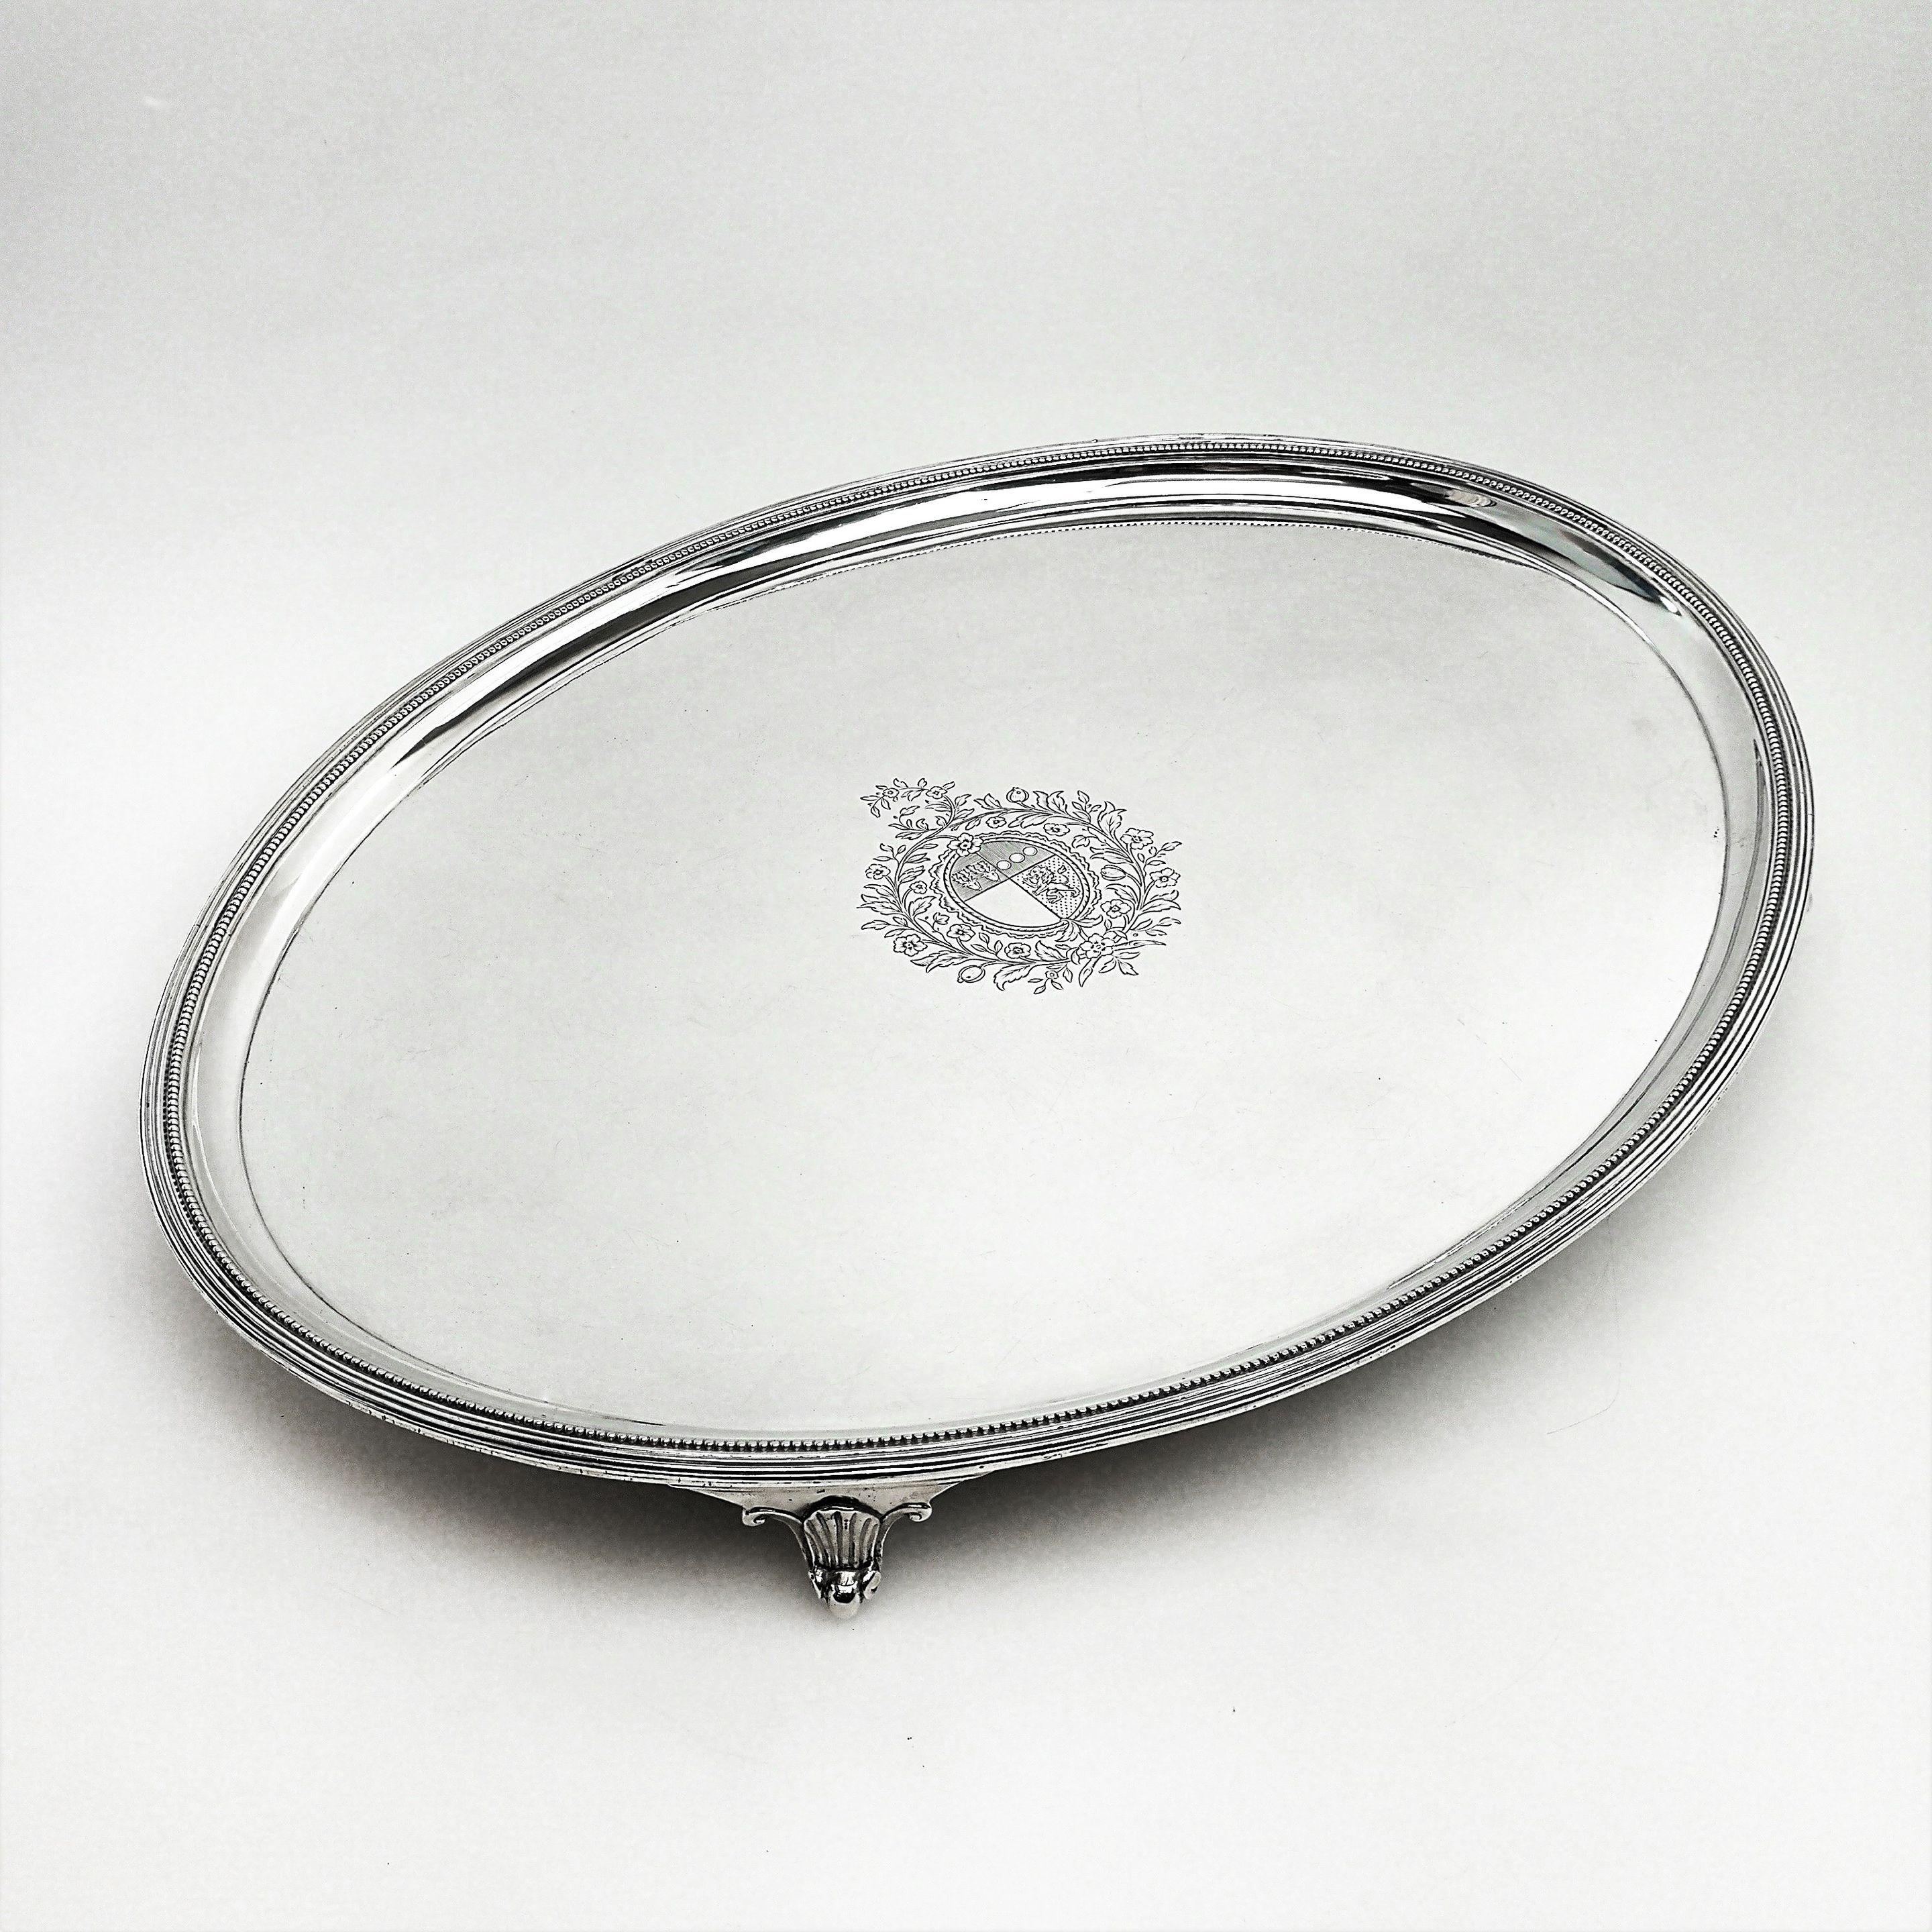 A Classic George III oval solid Silver salver. This large oval  Georgian Salver is simply embellished with a classic beaded border and stands on four scroll feet. The Salver has an impressive crest engraved in the centre. 
 
 Made in London in 1788